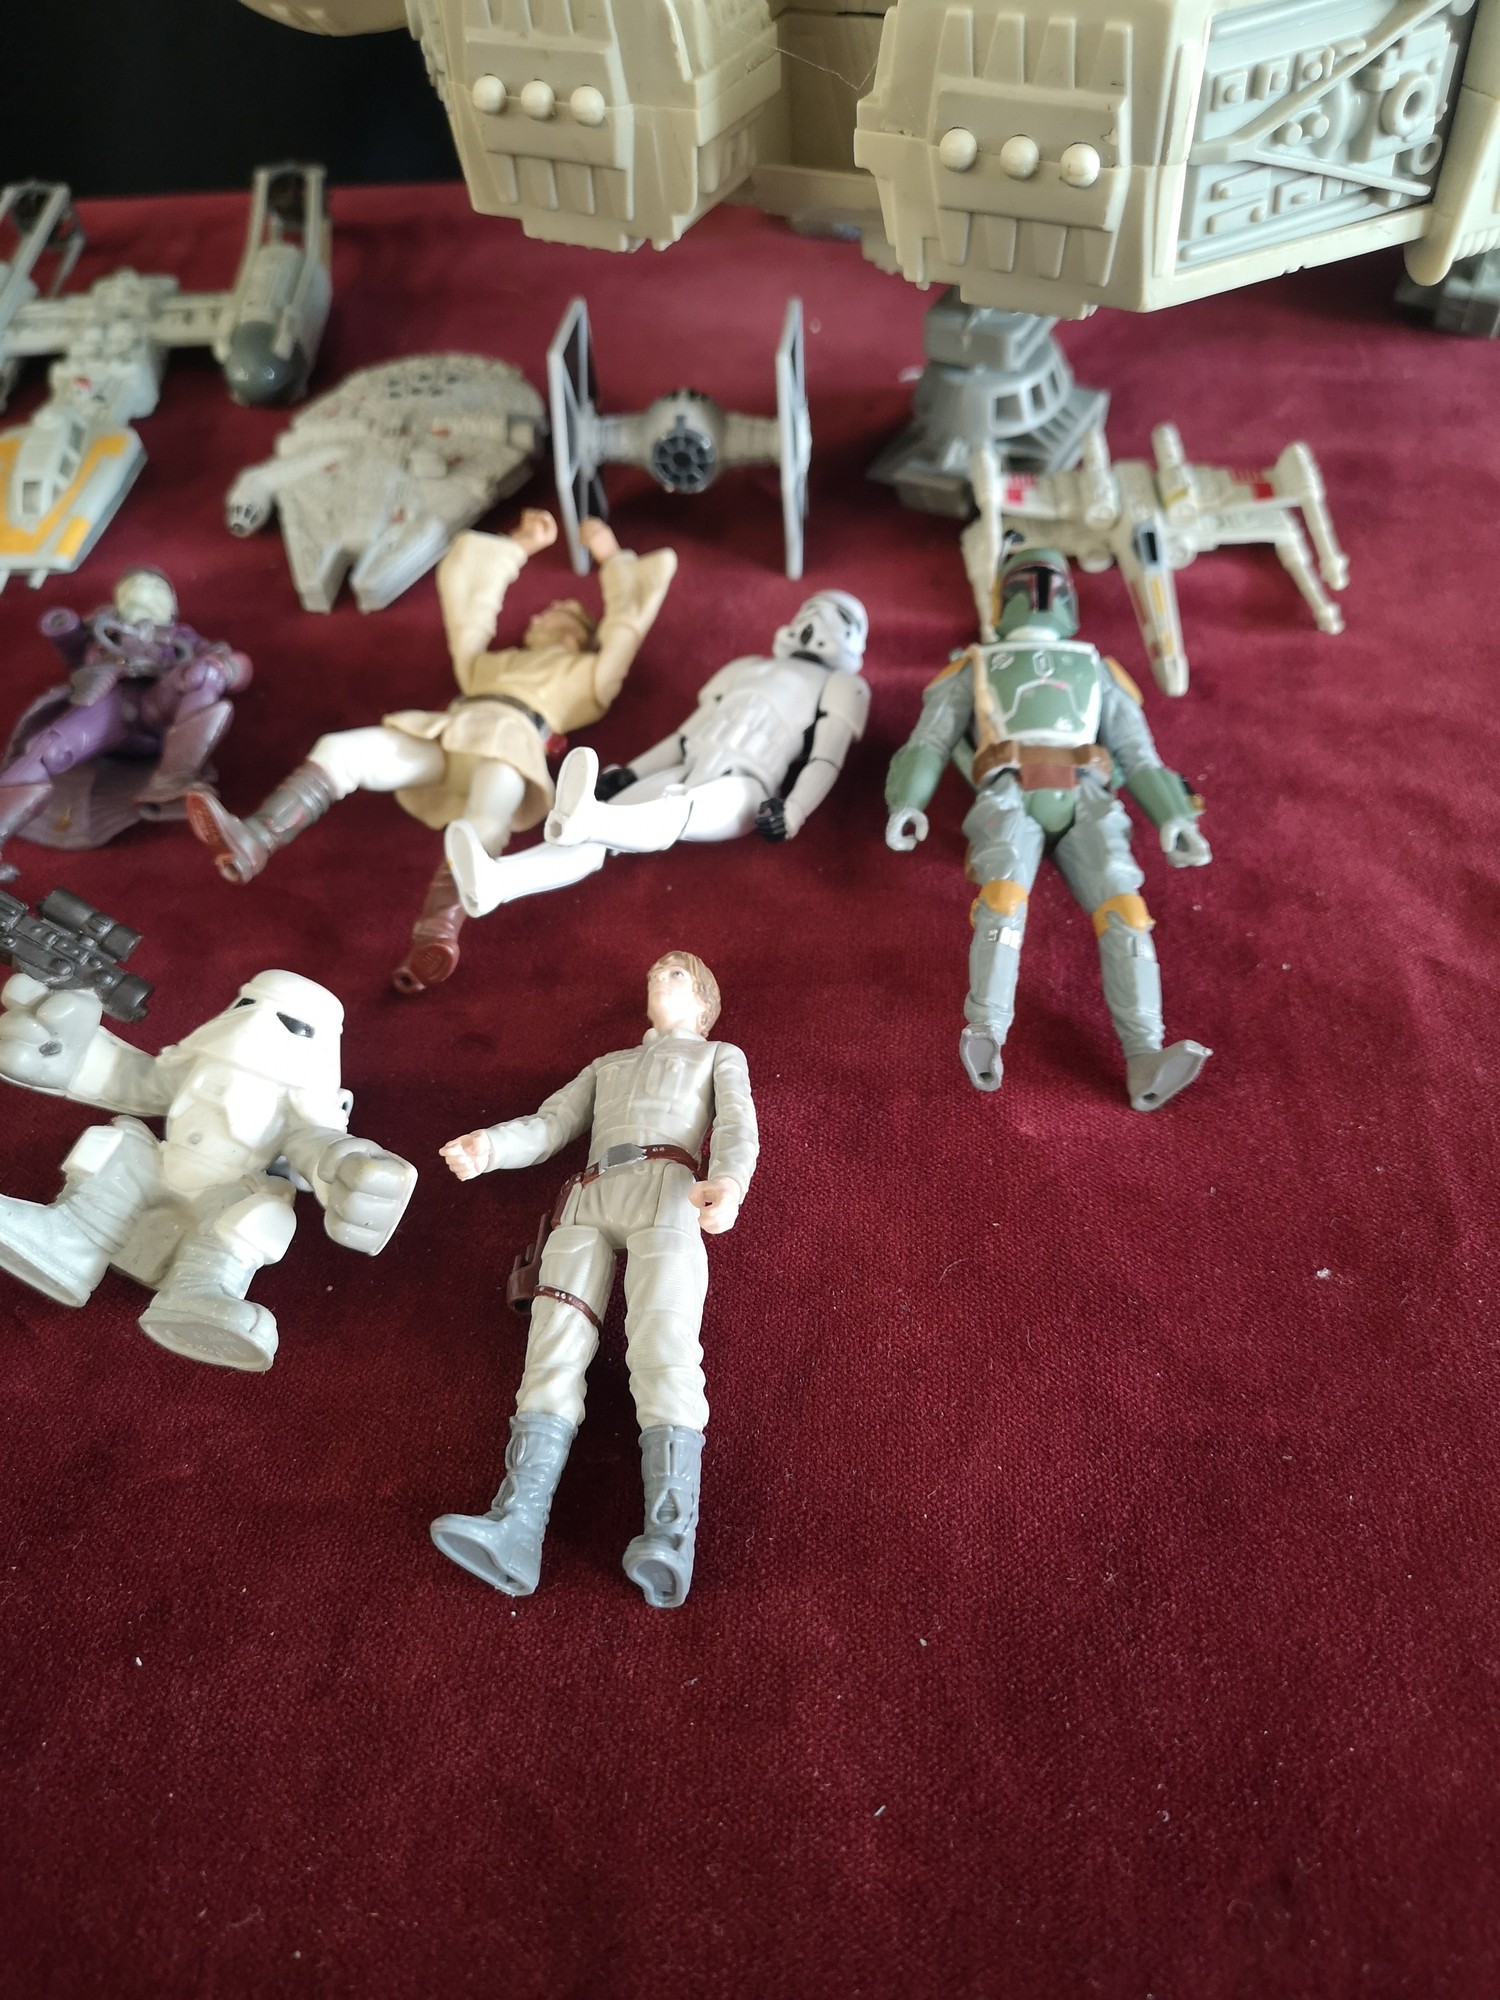 Lot of star wars toys etc includes millennium falcon small edition. - Image 3 of 3